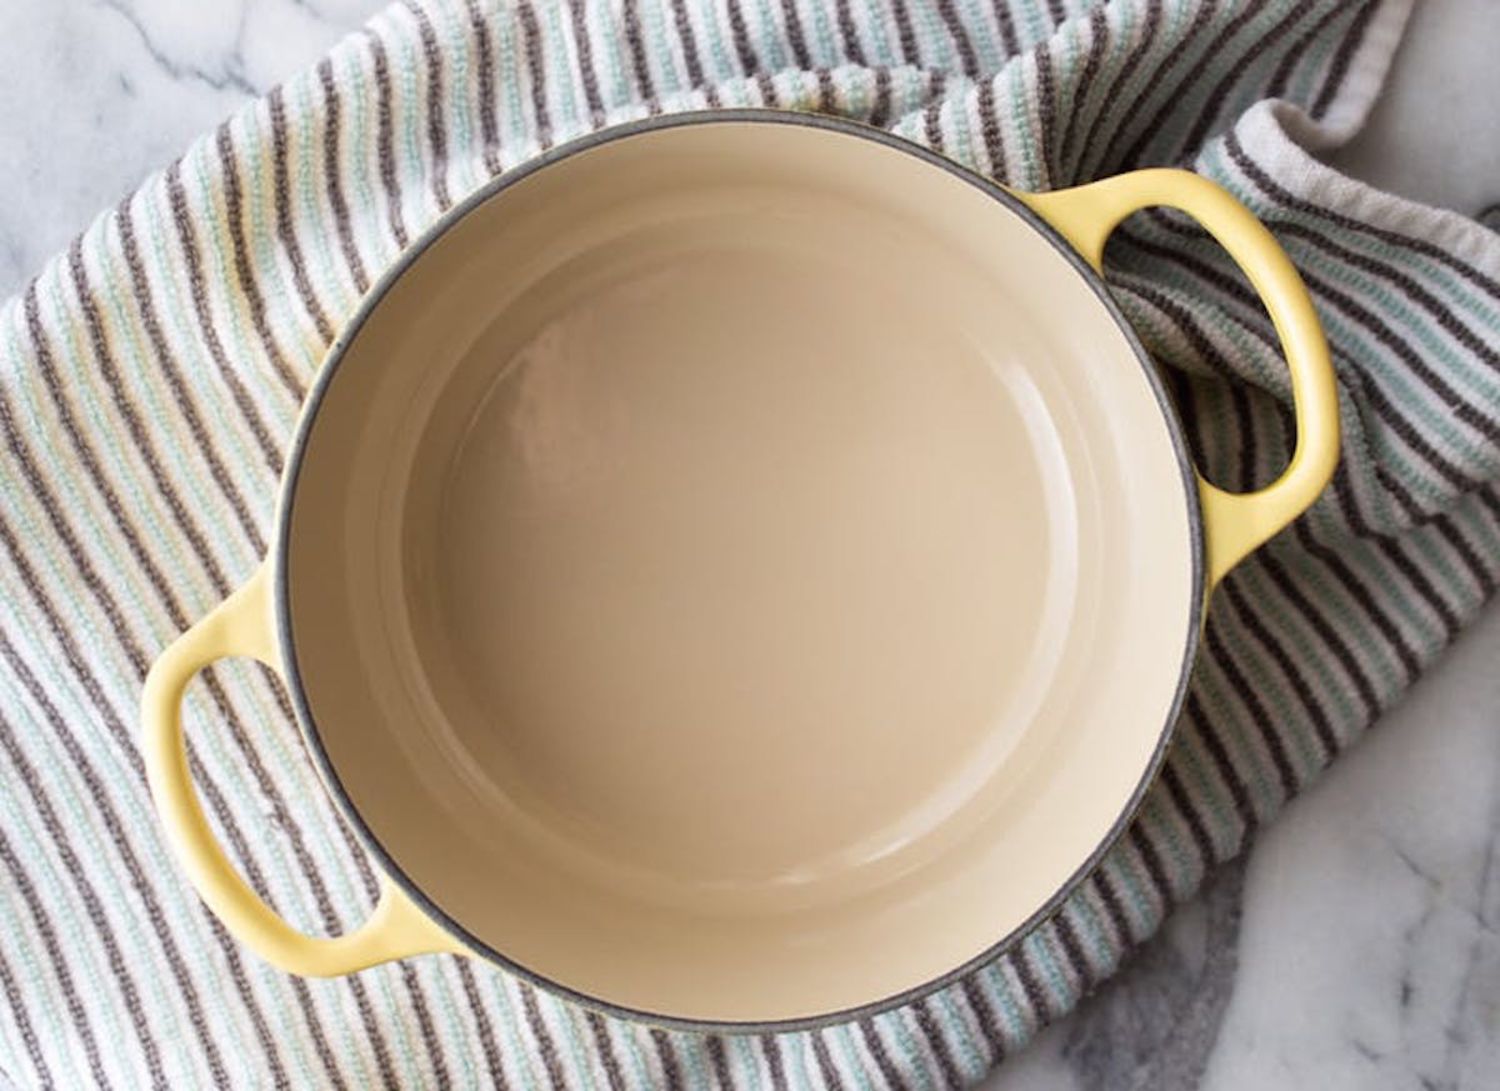 How To Clean Burnt Stains Off Enameled Dutch Oven | Kitchn